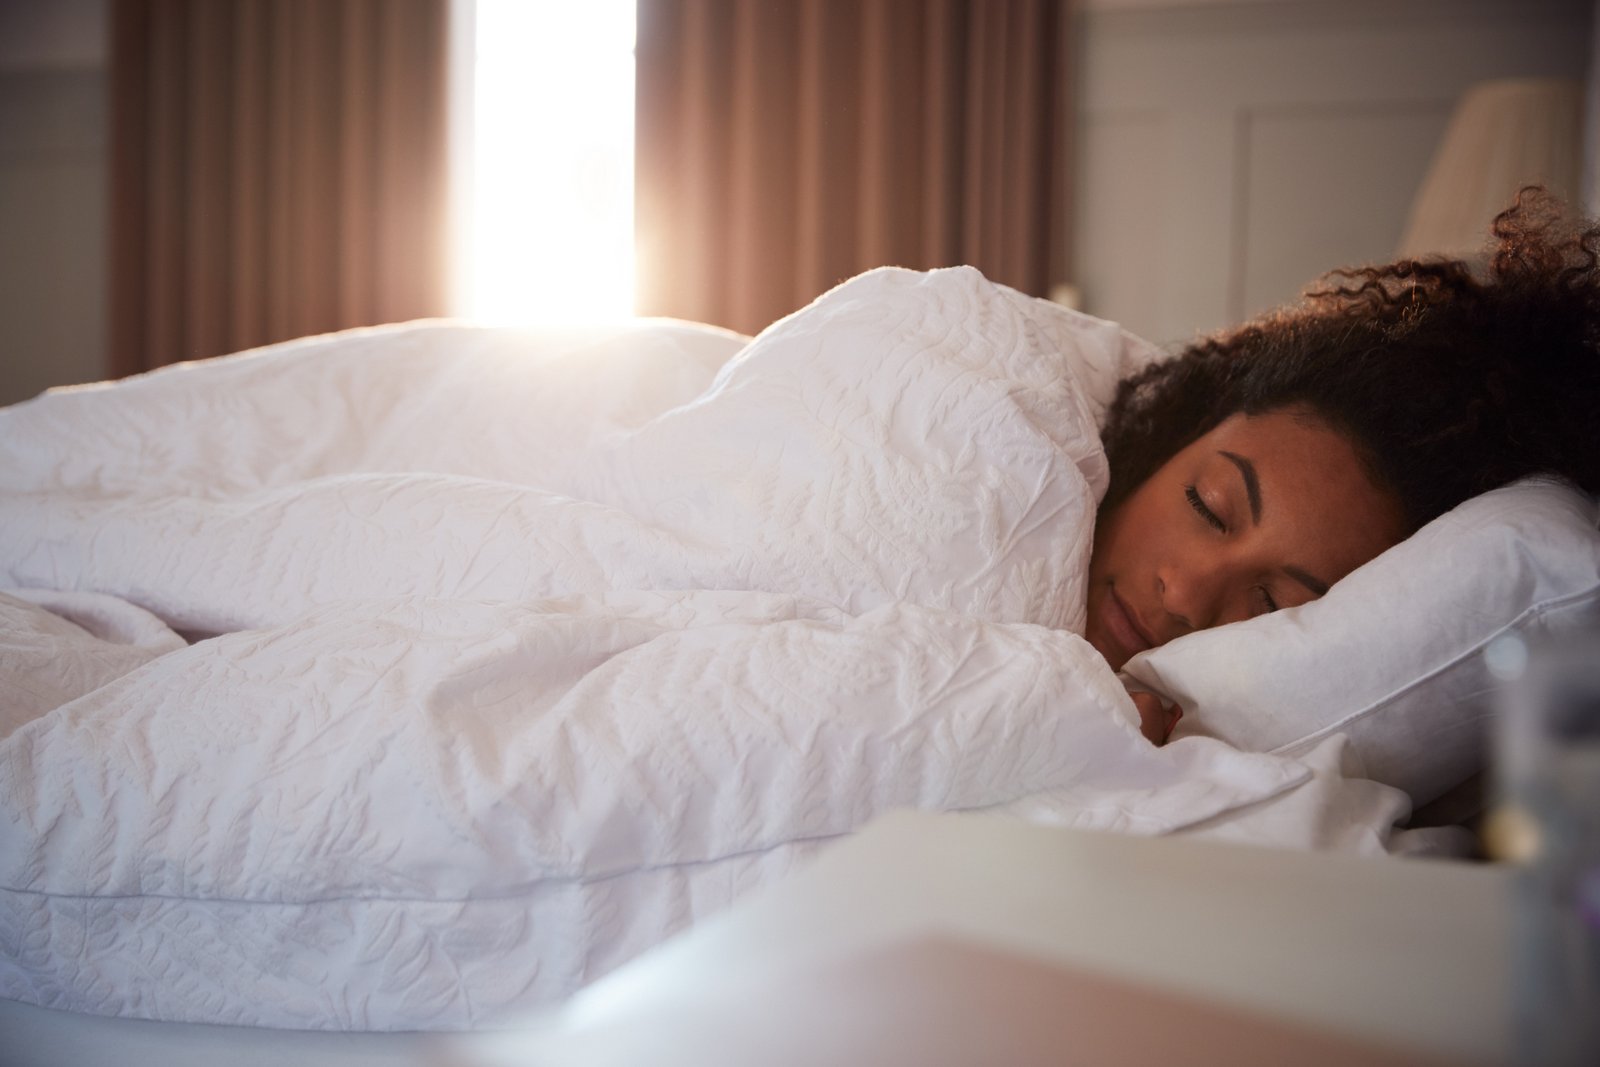 Woman sleeping with a fluffy white comforter and pillow